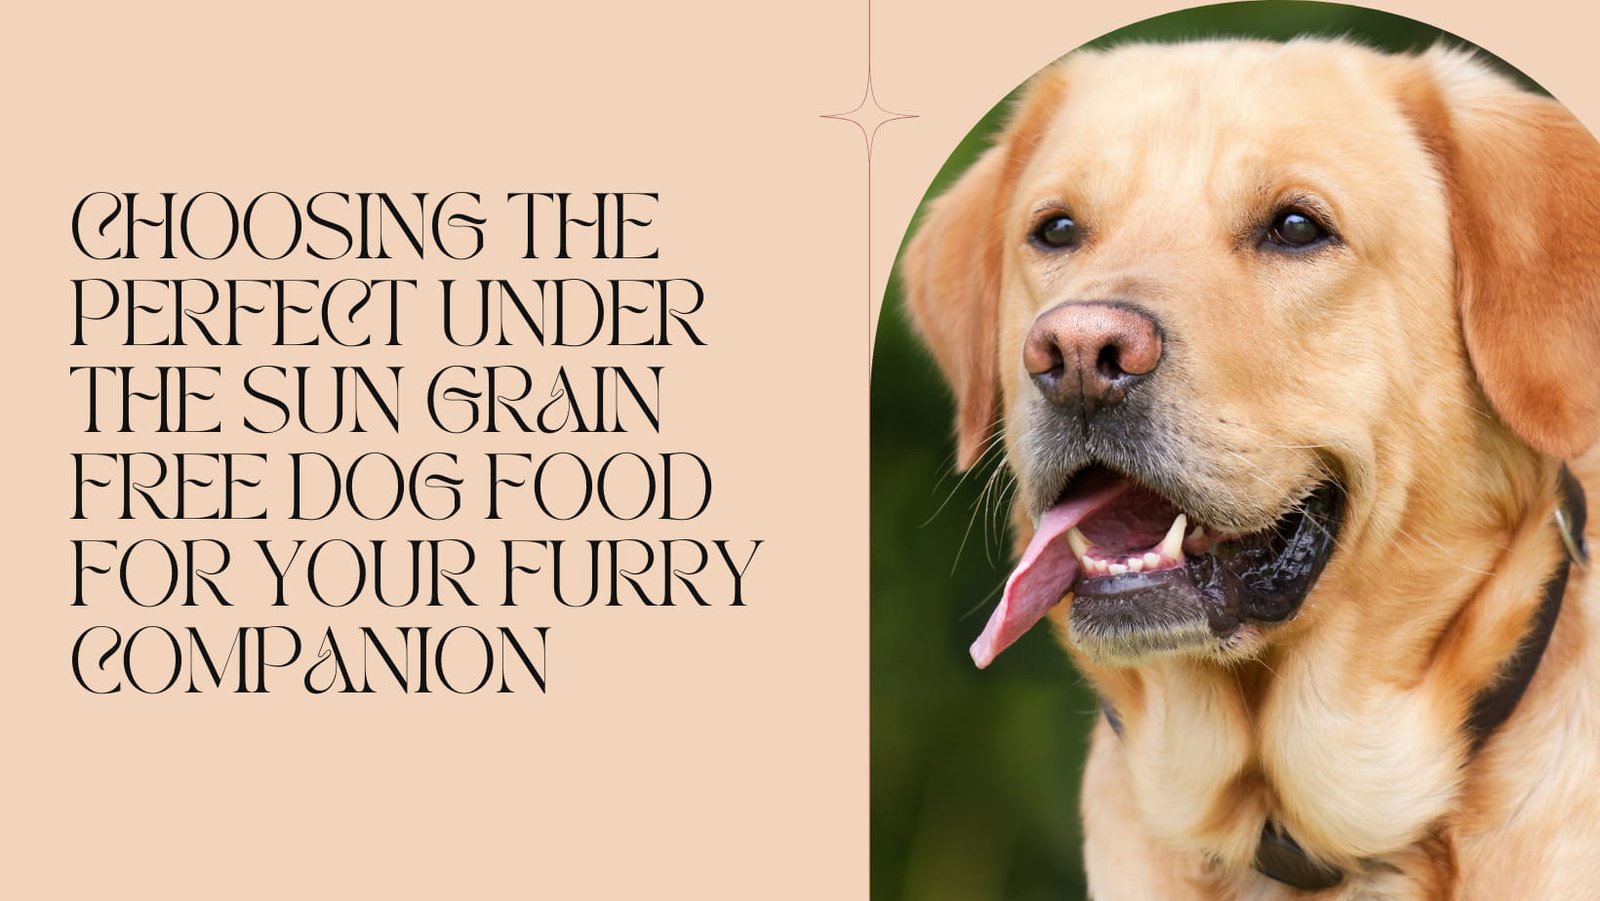 Choosing the Perfect Under the Sun Grain Free Dog Food for Your Furry Companion